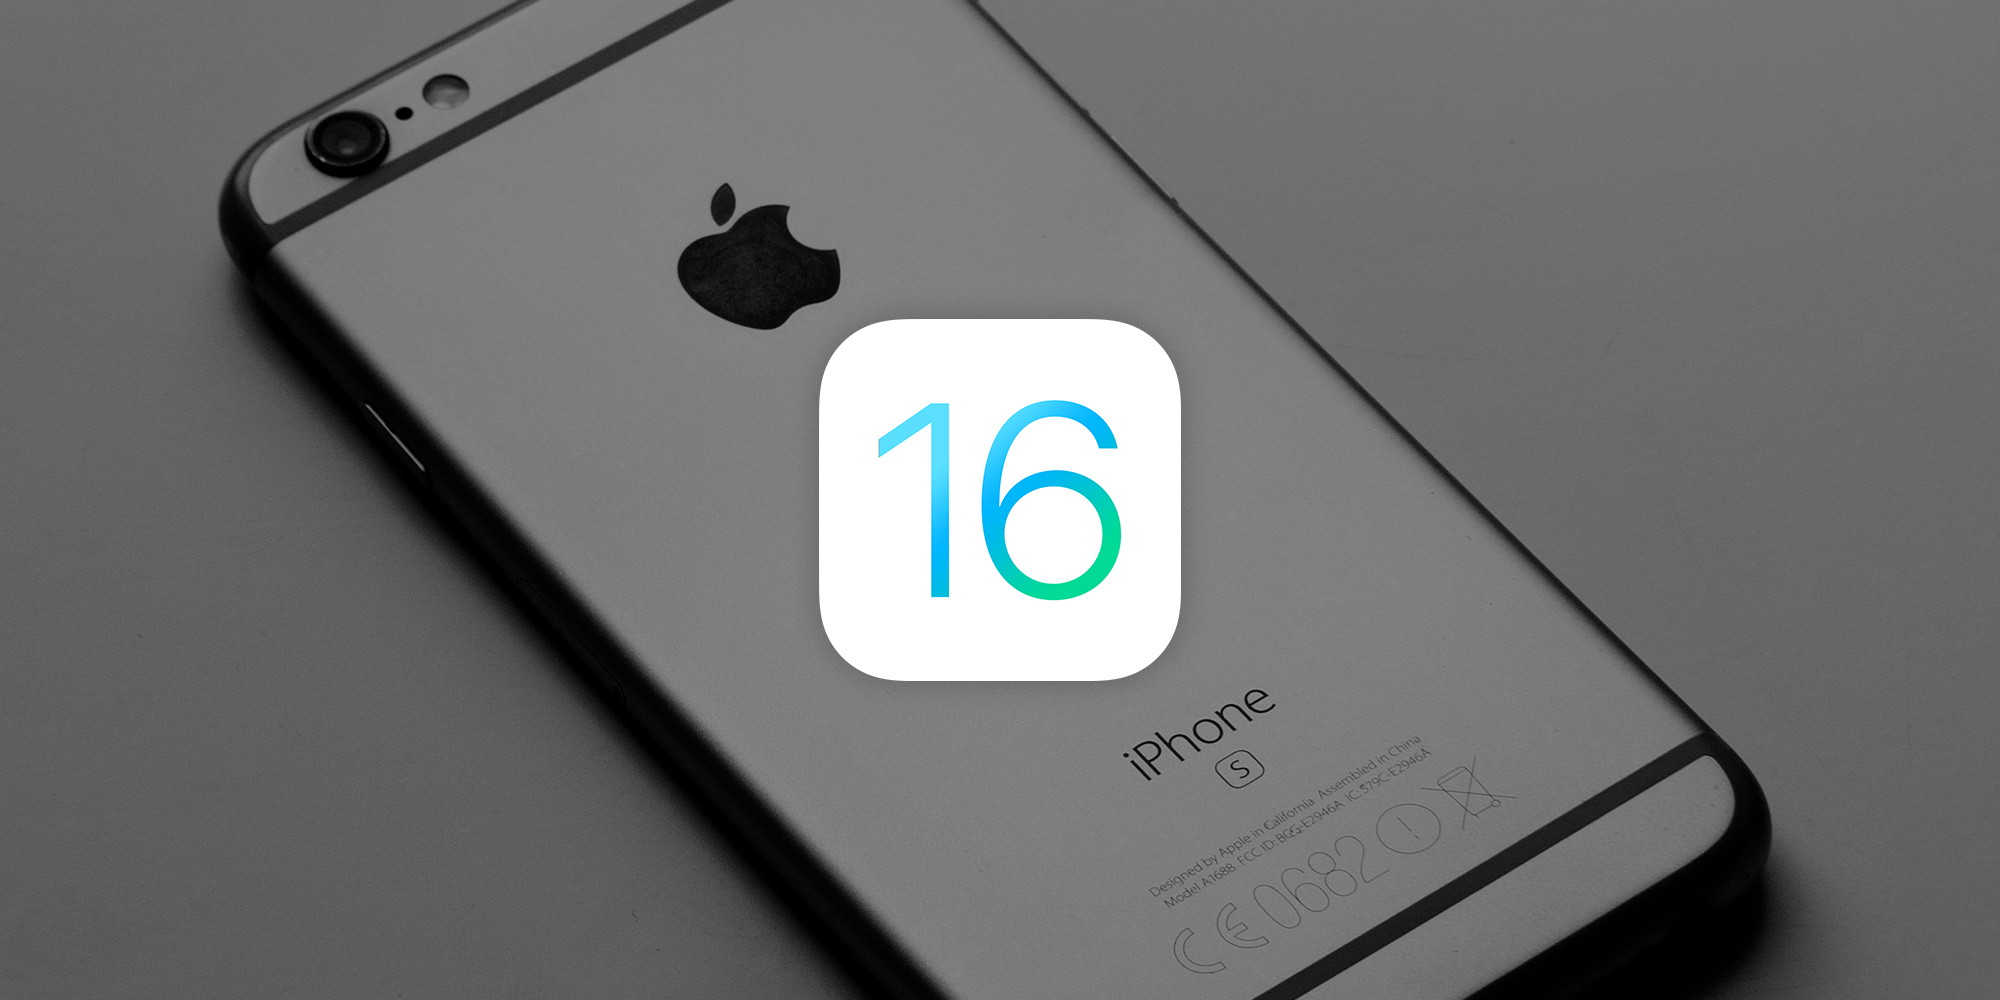 Rumor: iOS 16 to drop support for iPhone 6s, iPhone 6s Plus and first-gen iPhone SE - 9to5Mac